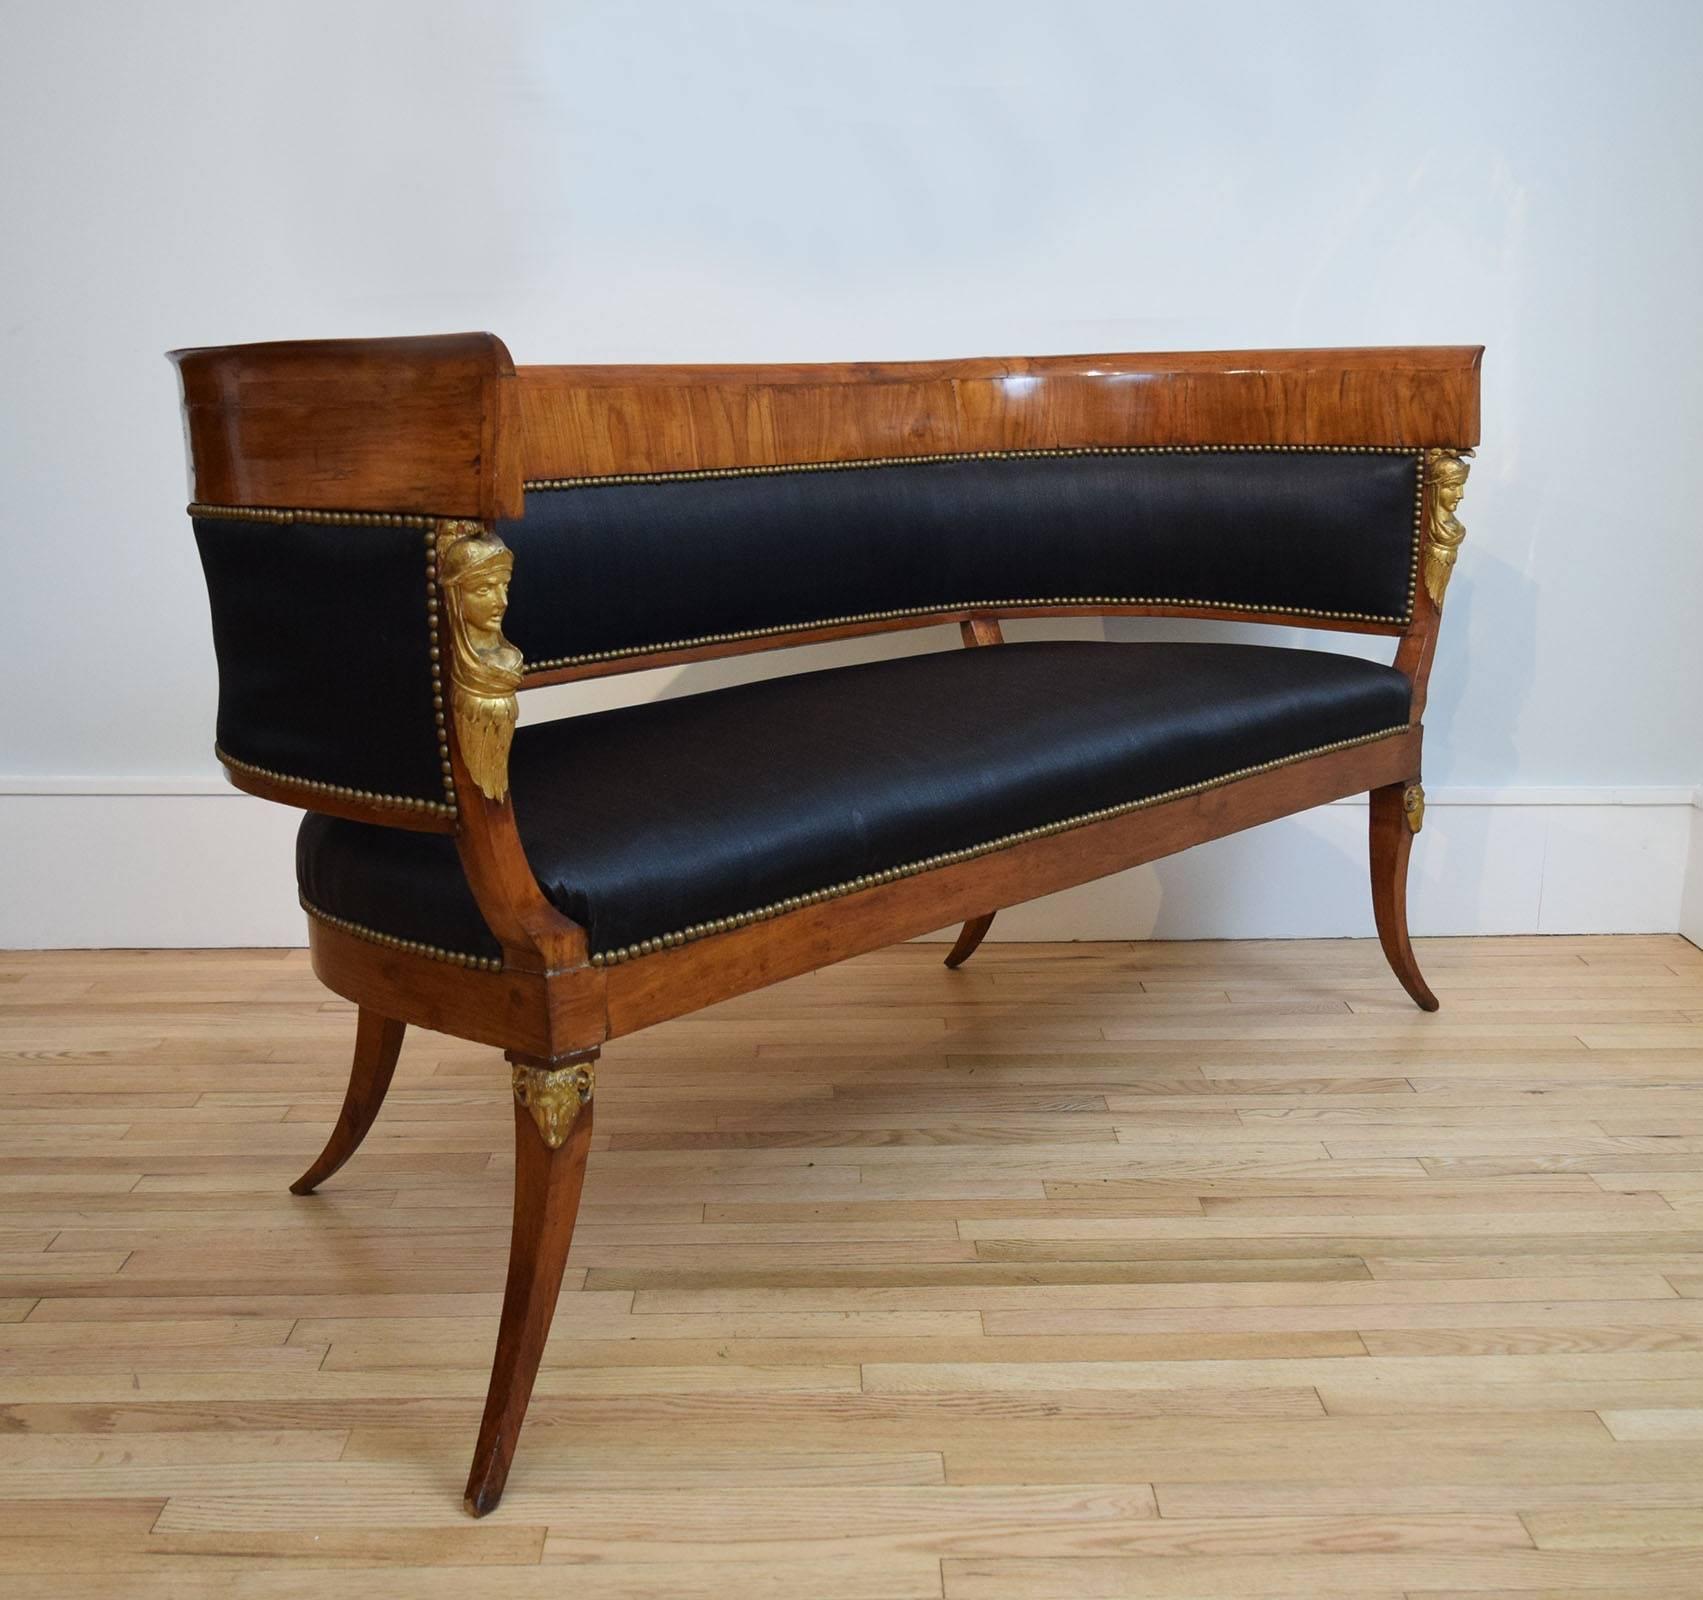 This sculptural sofa, of solid and veneered walnut, has exquisite lines and was in the collection of Millicent Rogers, a Standard Oil heiress who had one of the most remarkable eyes of the last century. A collector and a designer of jewelry, she was